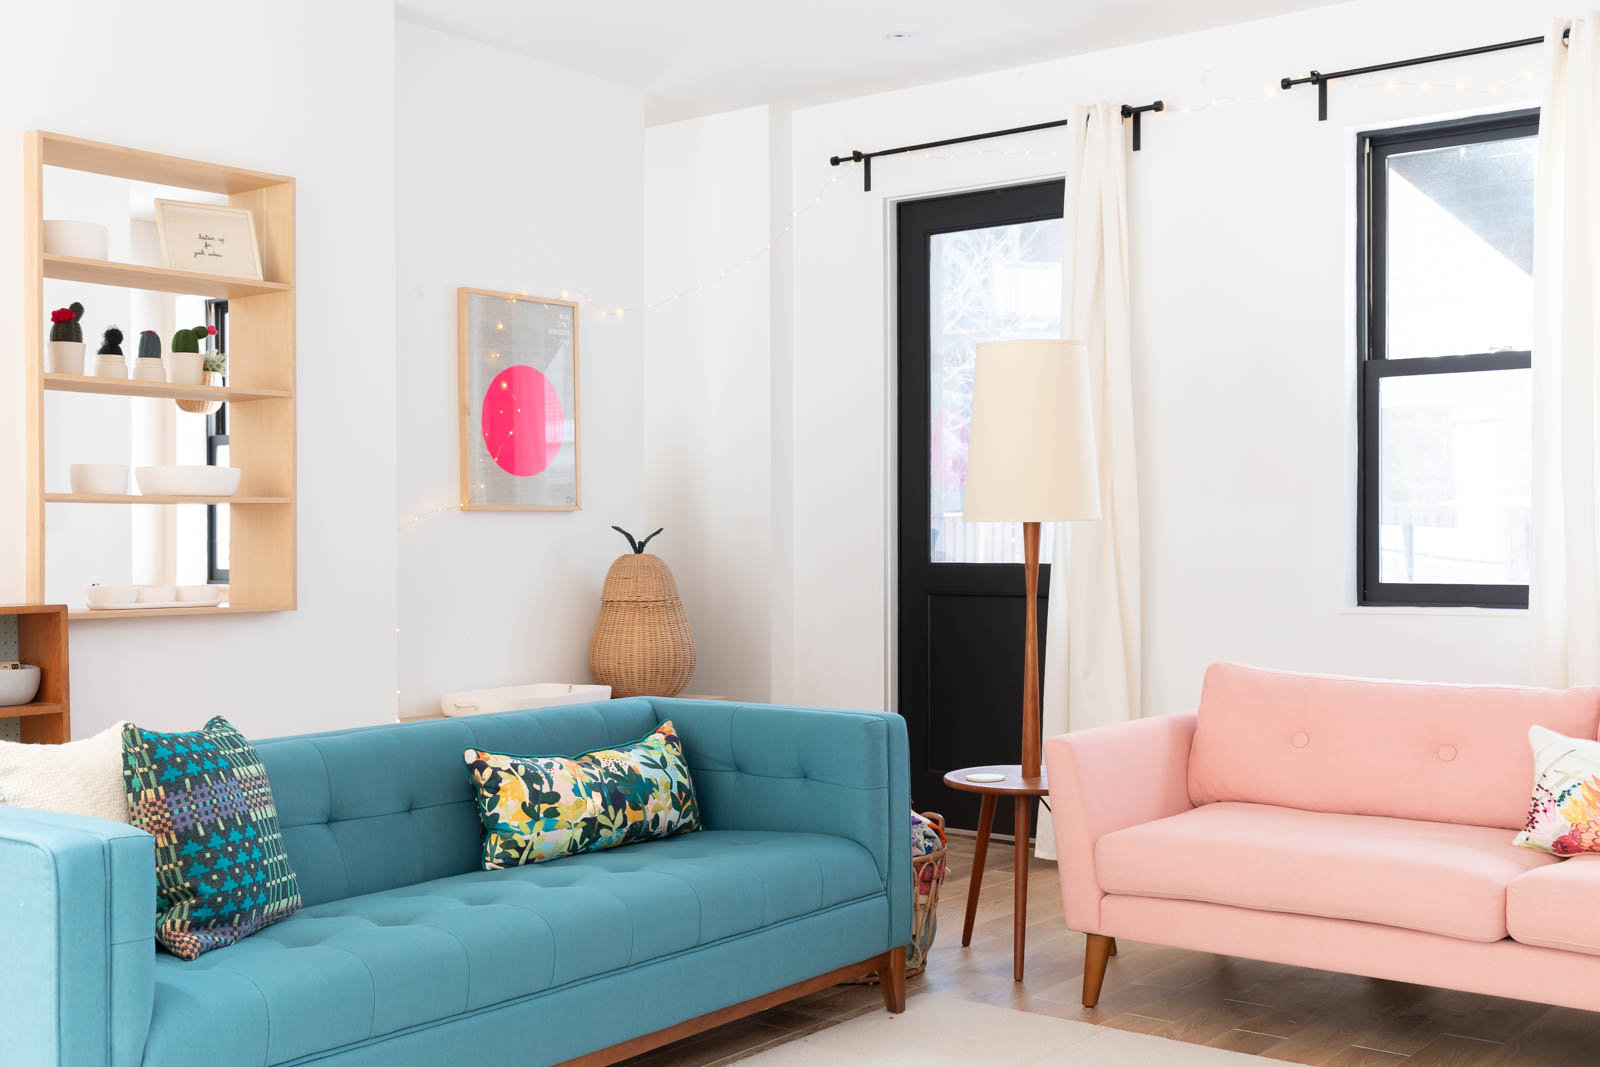 A blue couch and pink couch side by side in the living room